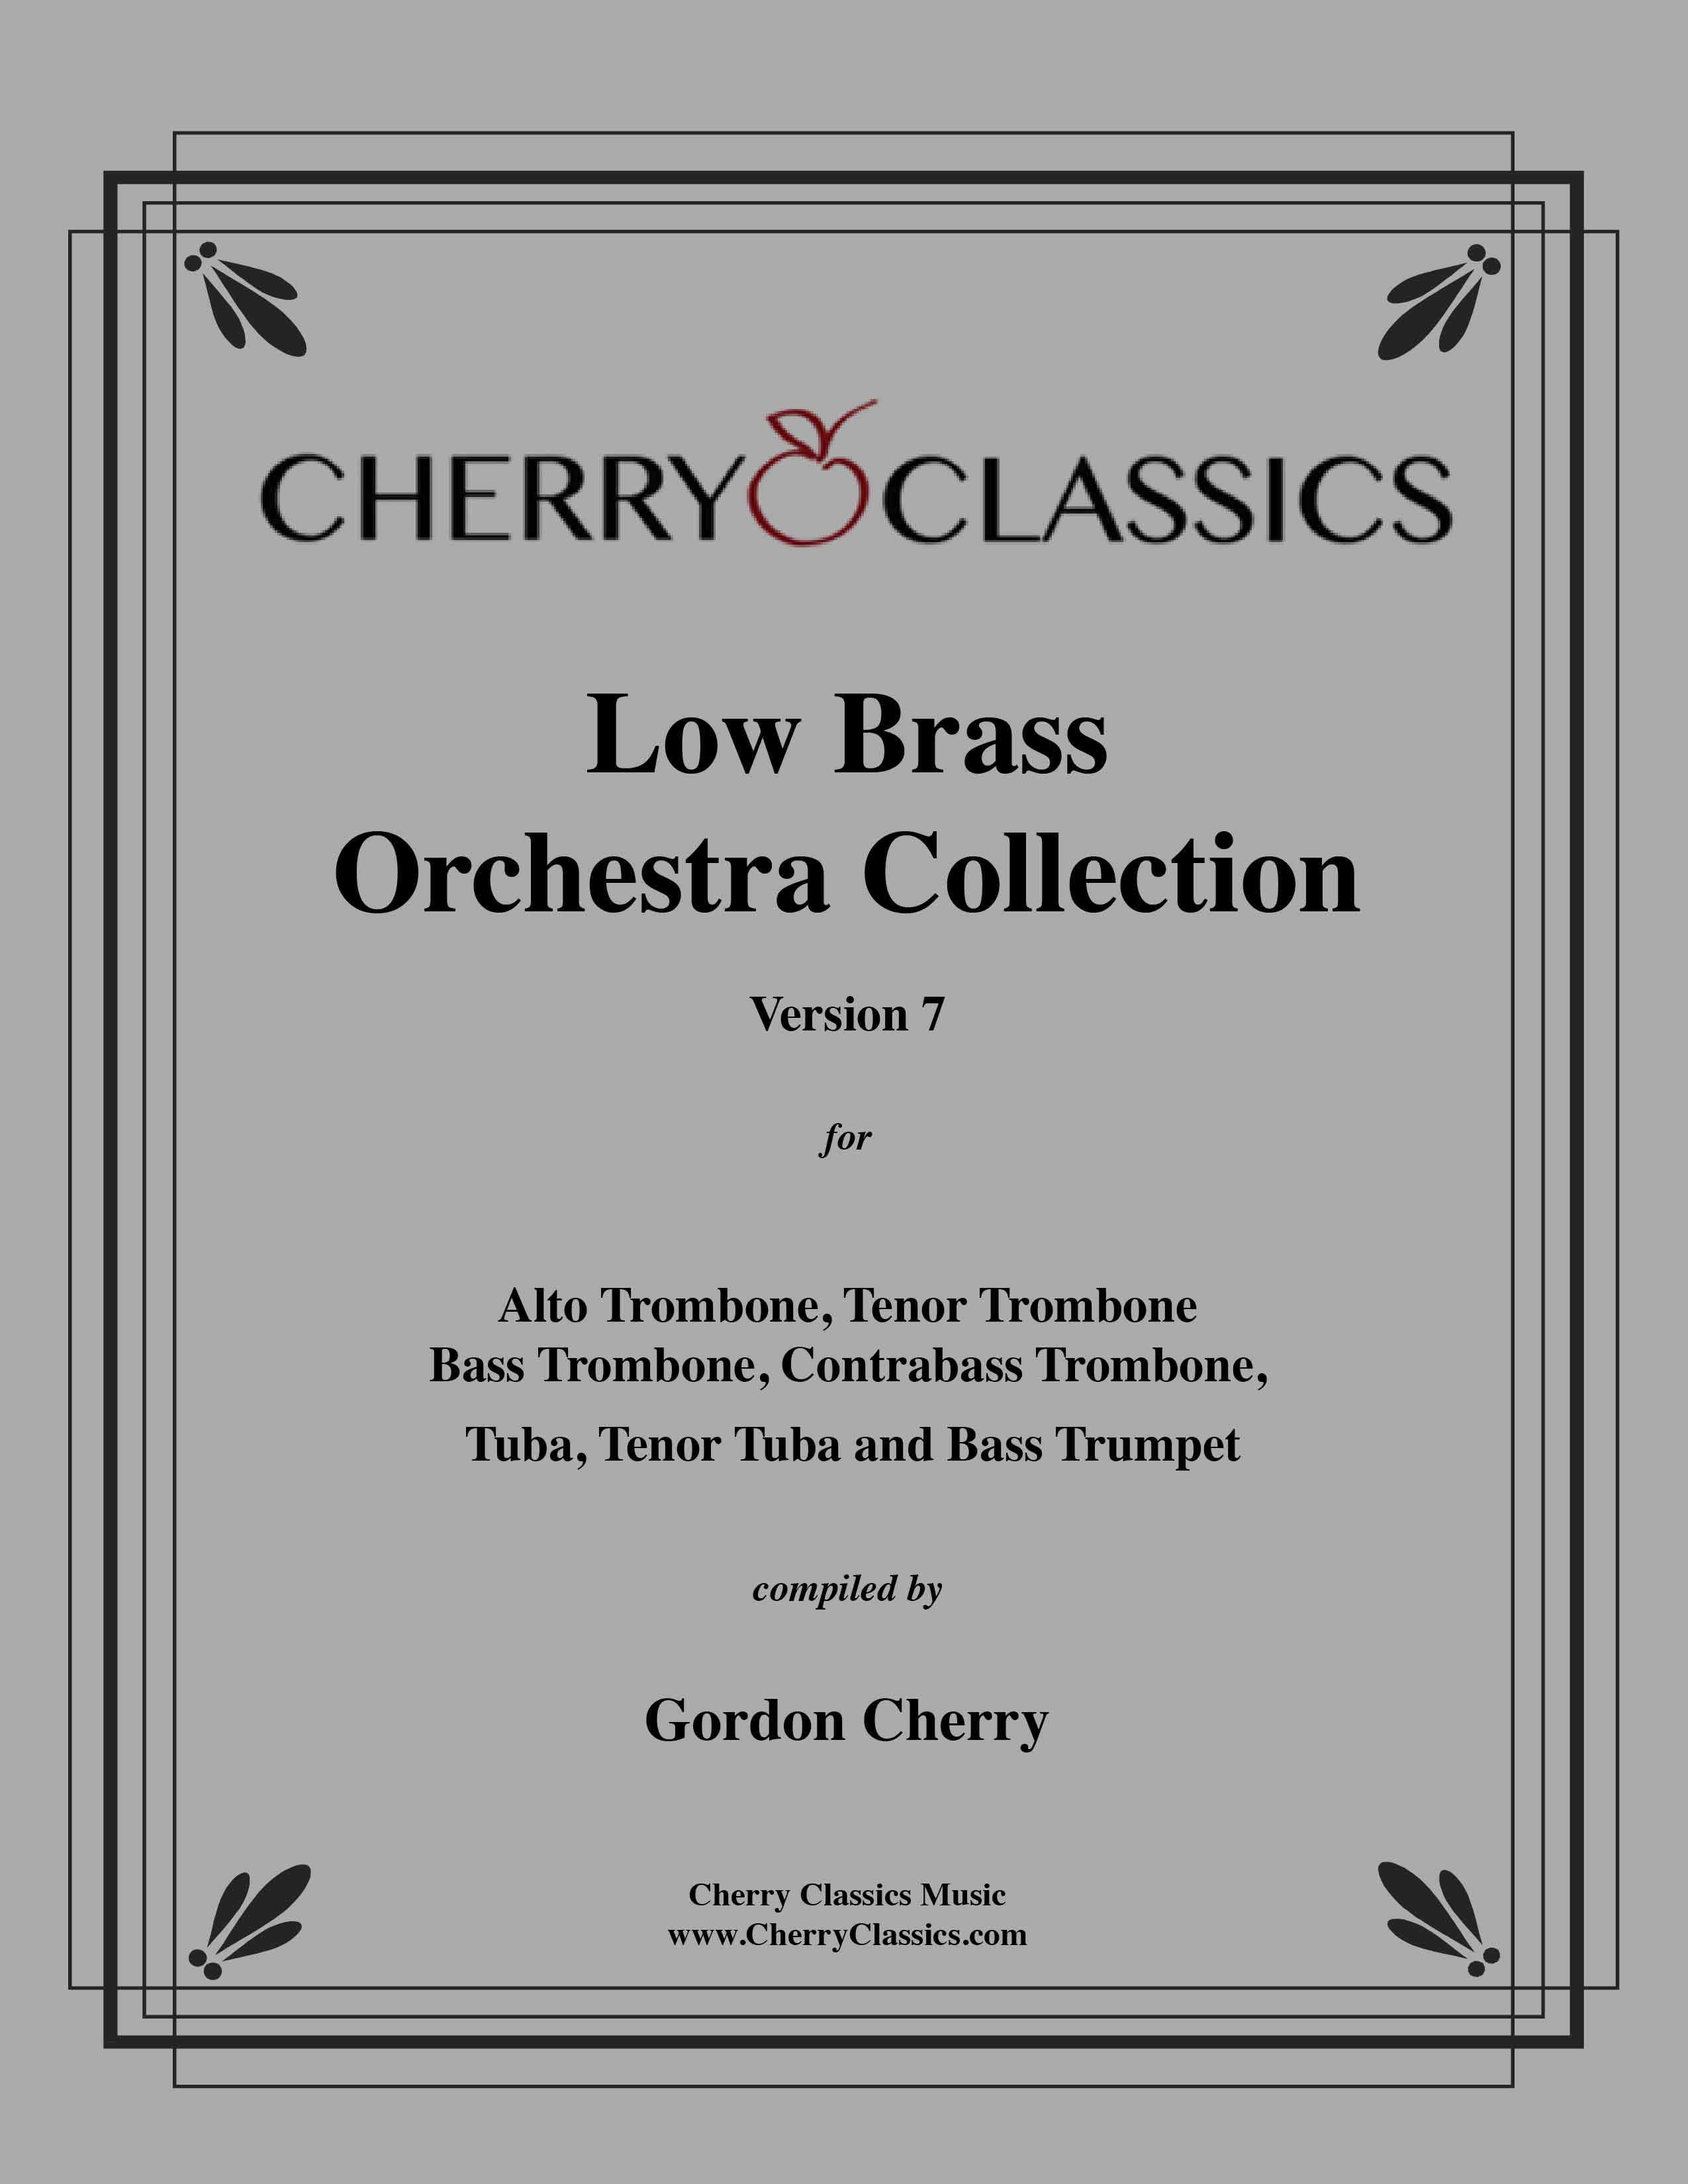 Cherry - Low Brass Orchestra Collection Version 7.0 Cherry